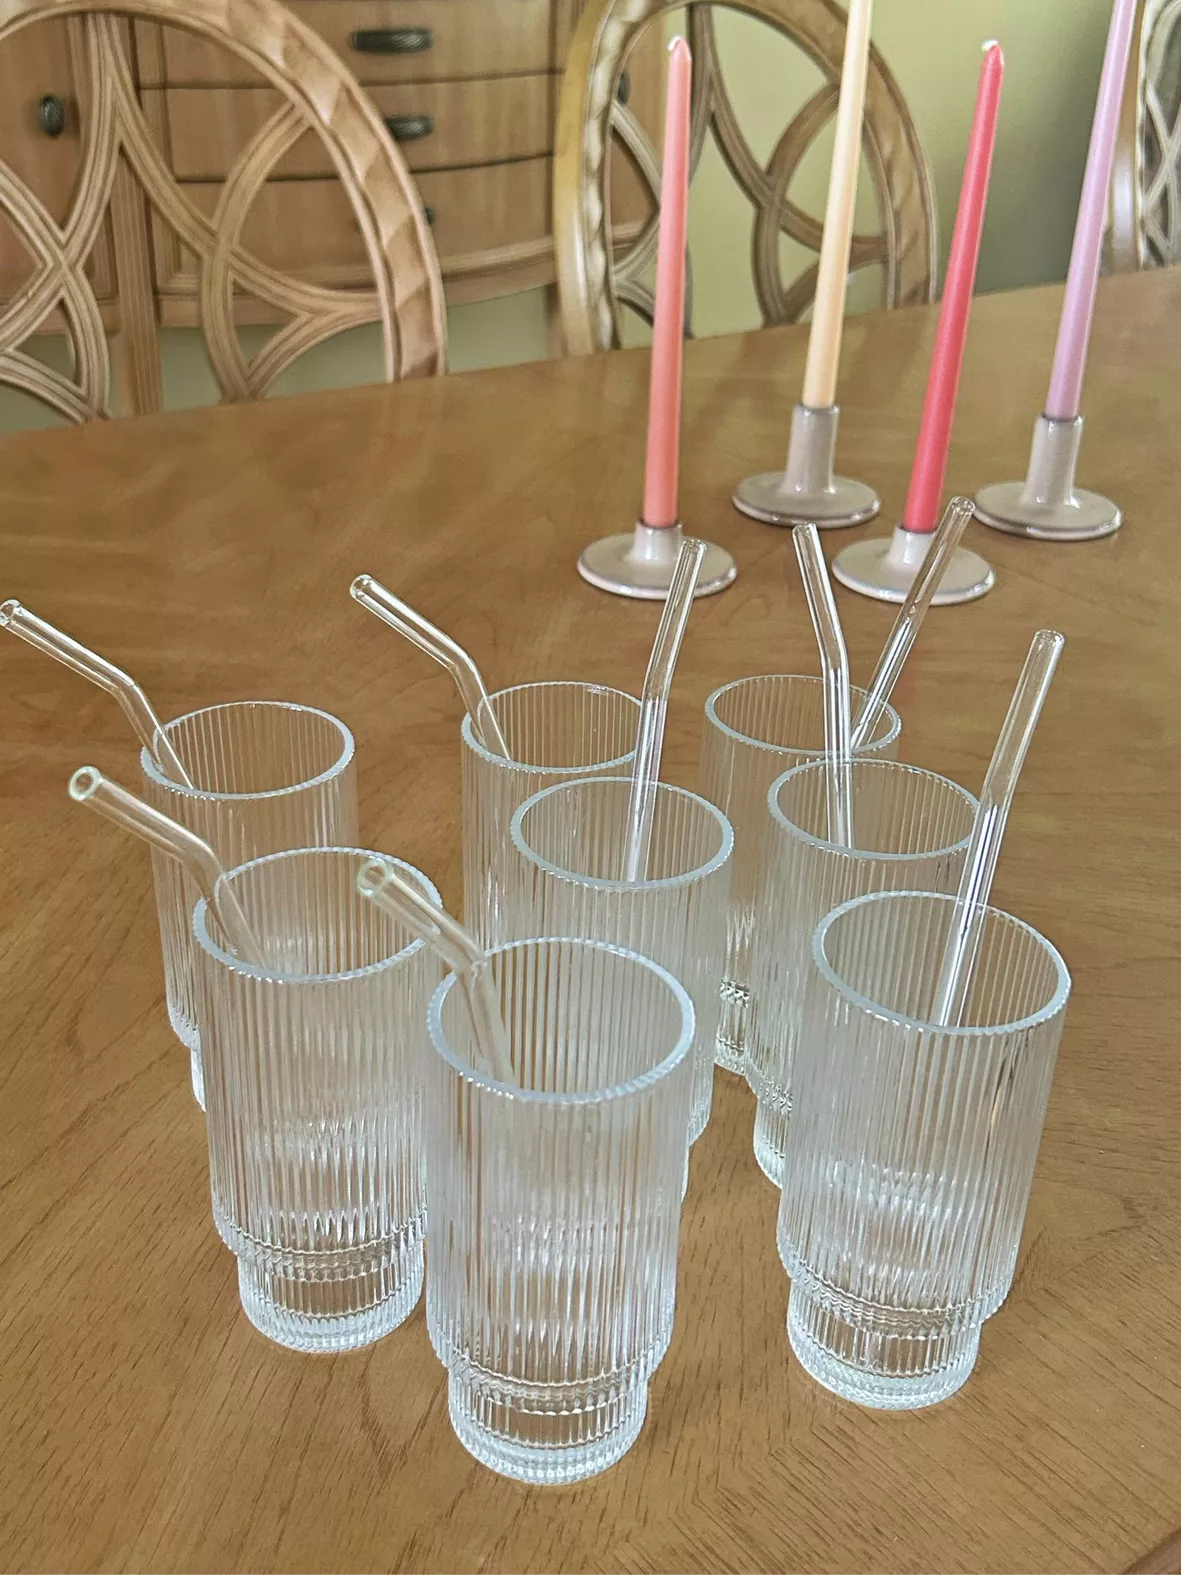 Combler Ribbed Glass Cups